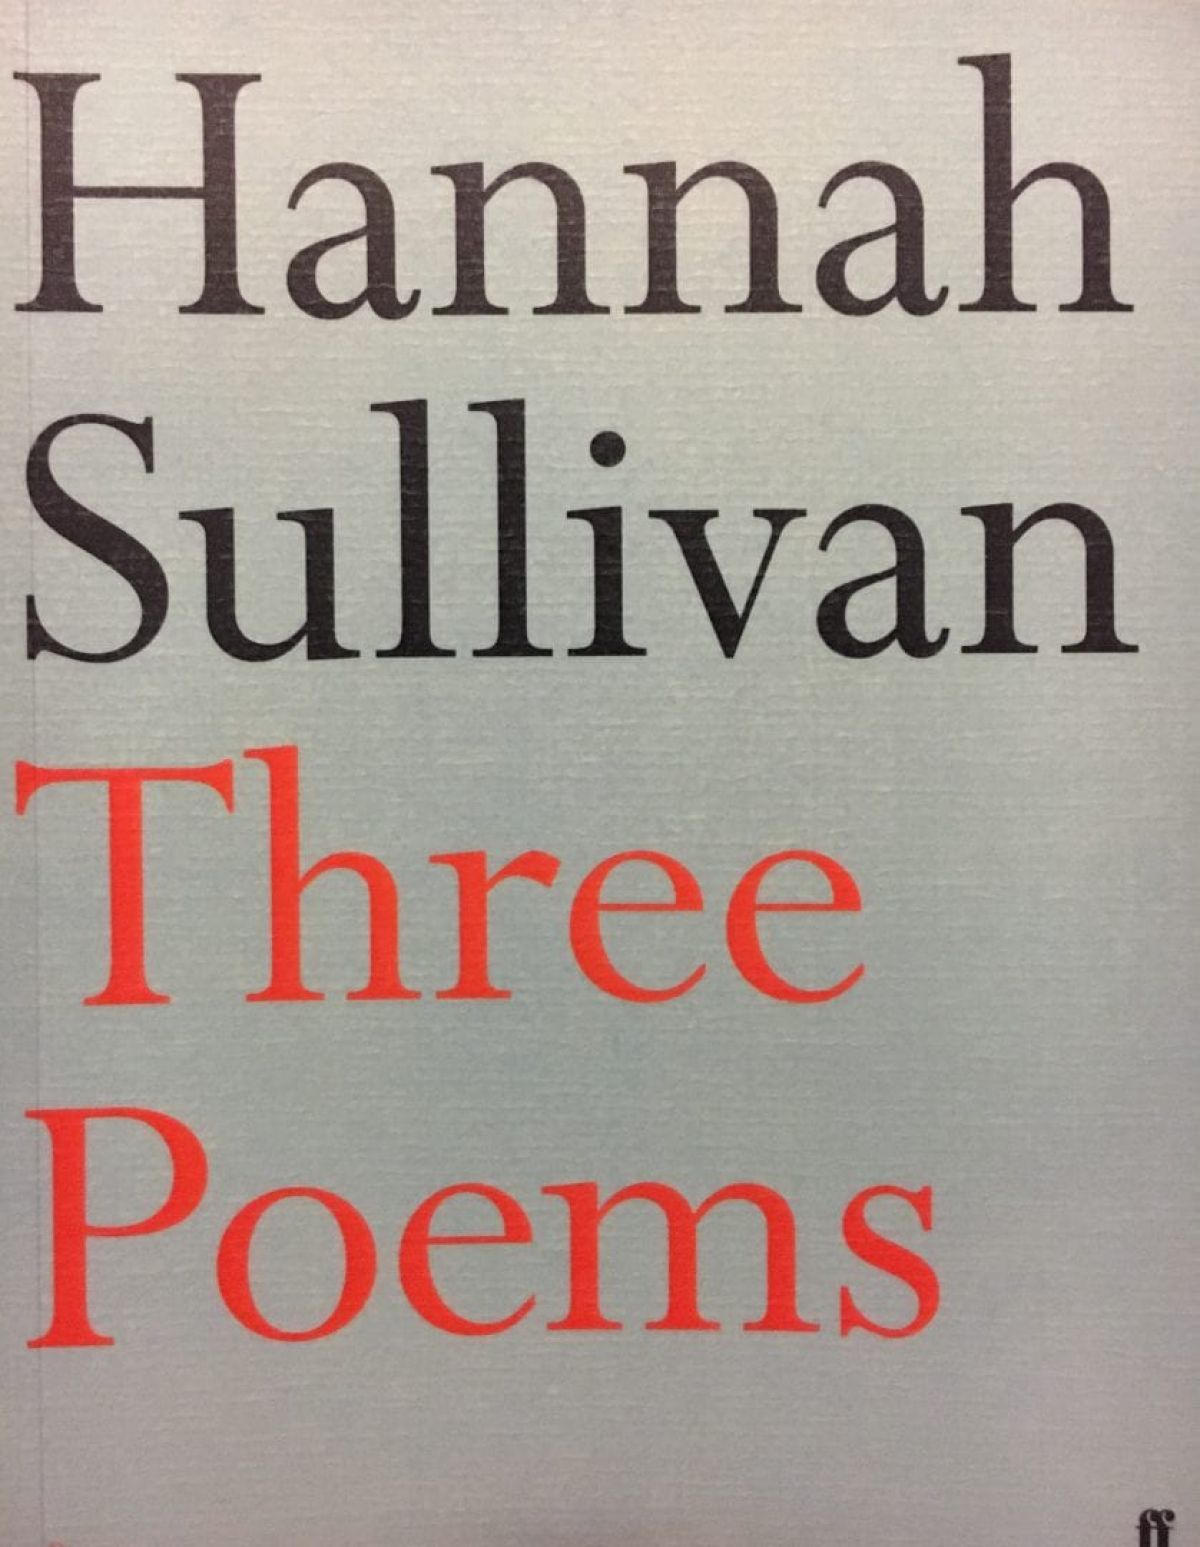 Review: Faber New Poets